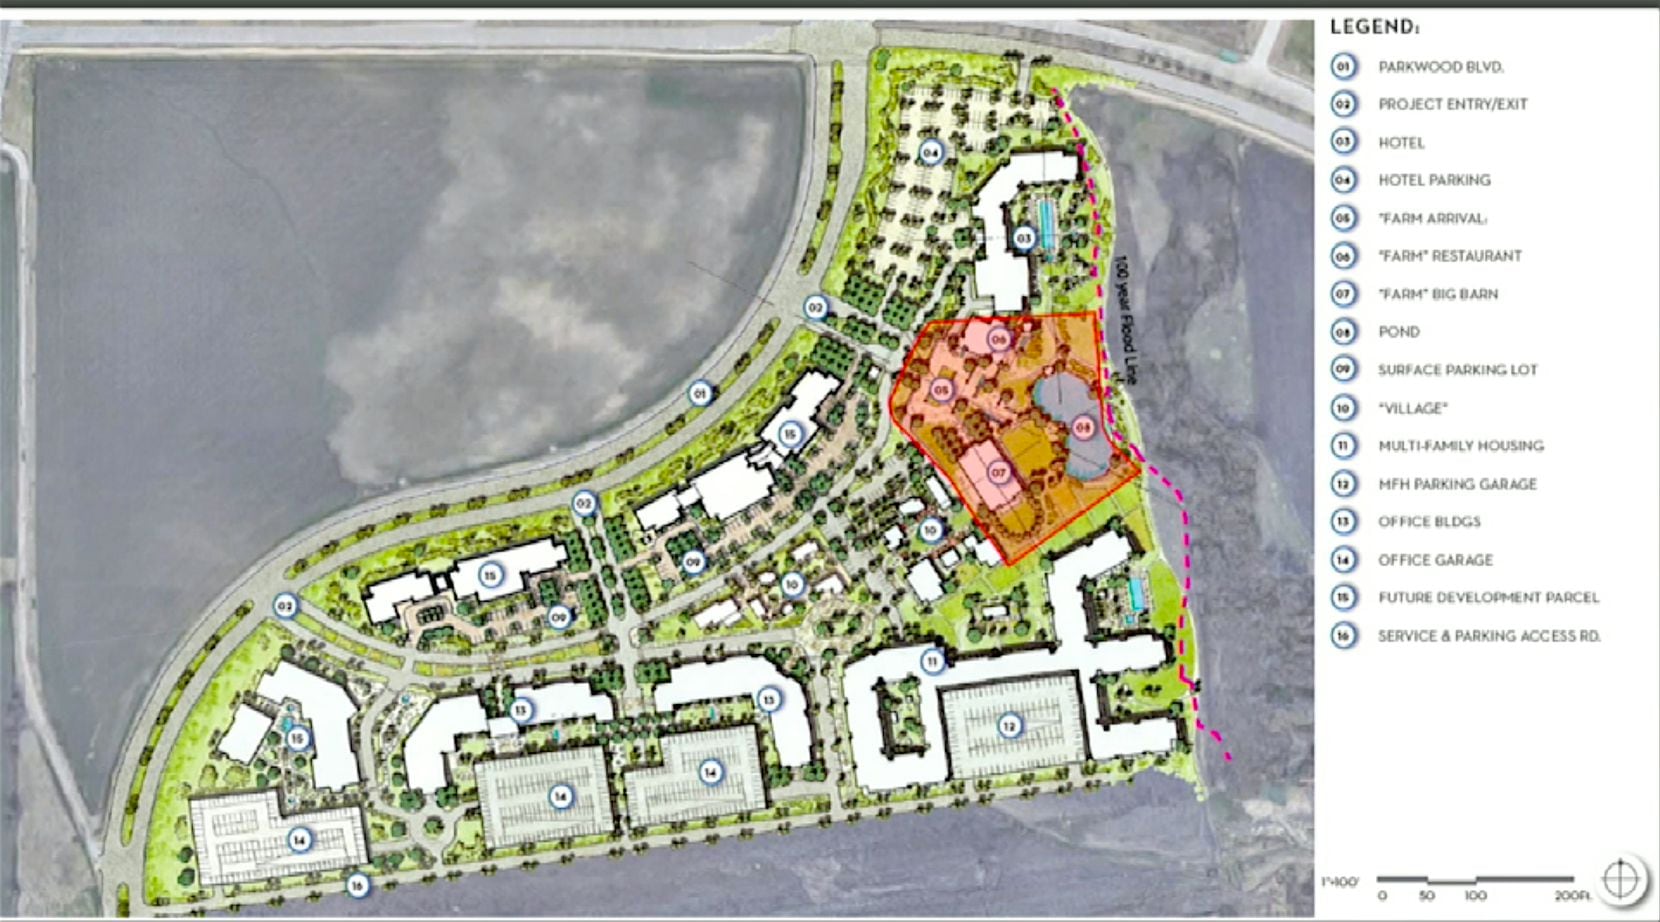 The 142-acre project located east of the Dallas North Toll Freeway would include office, hotel, retail and residential buildings.